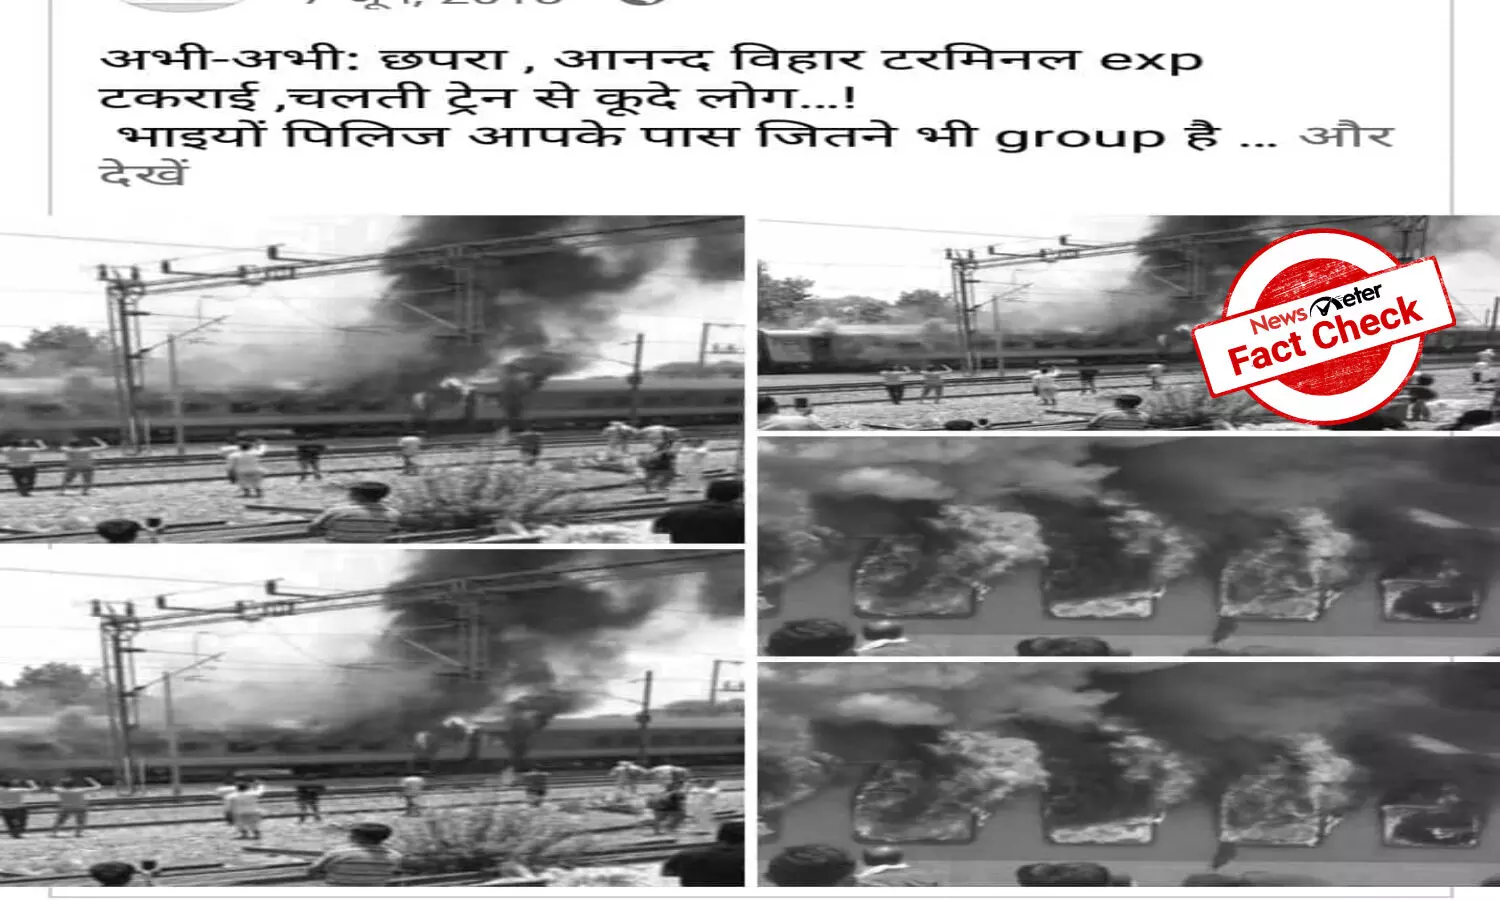 Fact Check: Old images of burning train in Andhra shared as recent incident in Chapra